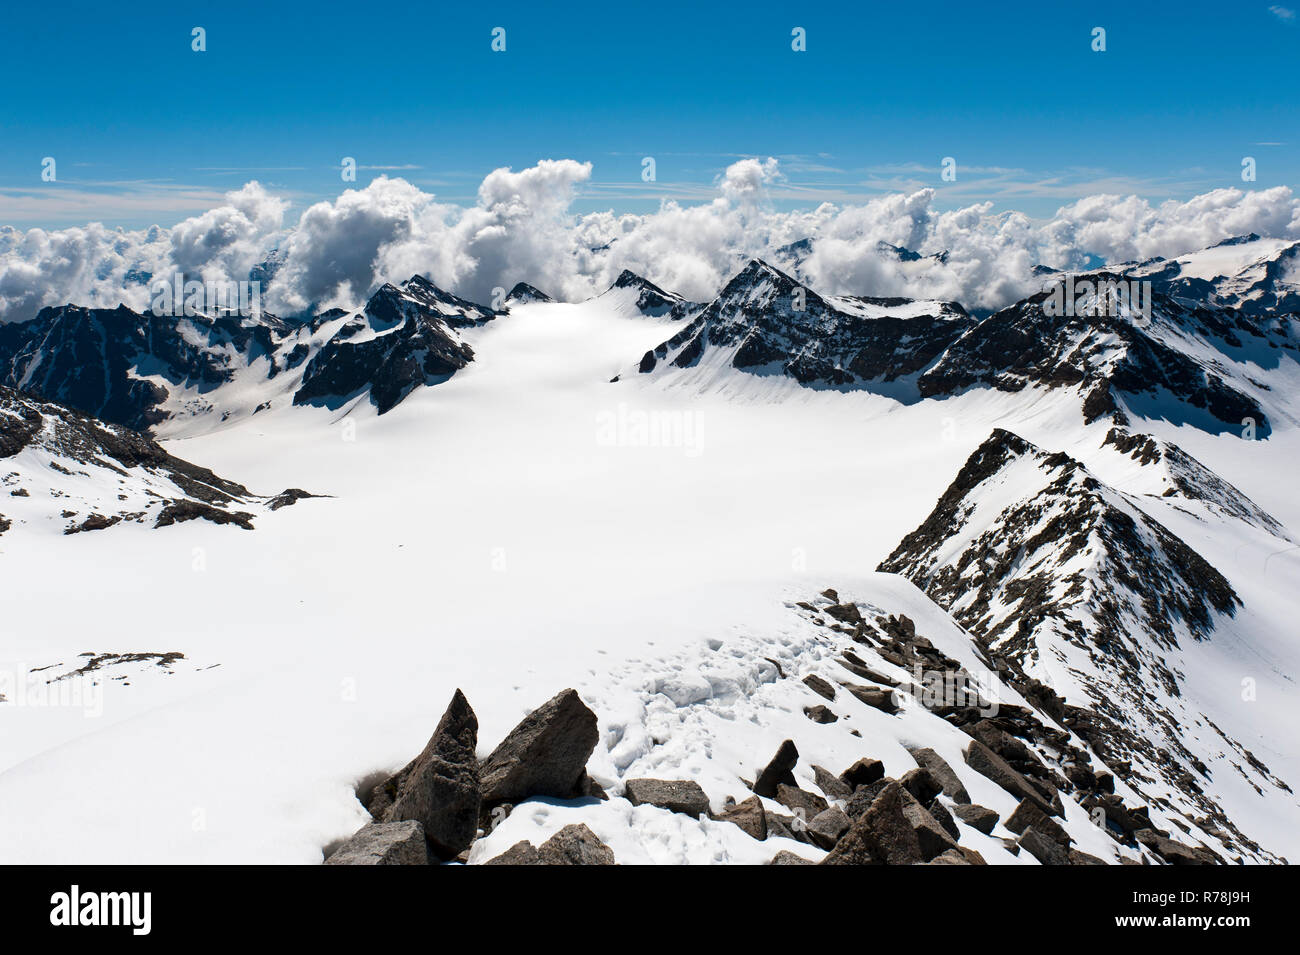 View of snow-covered peaks in the High Alps from Mt Vertainspitze, Cima Vertana, Laaser Ferner glacier, Ortler Alps Stock Photo